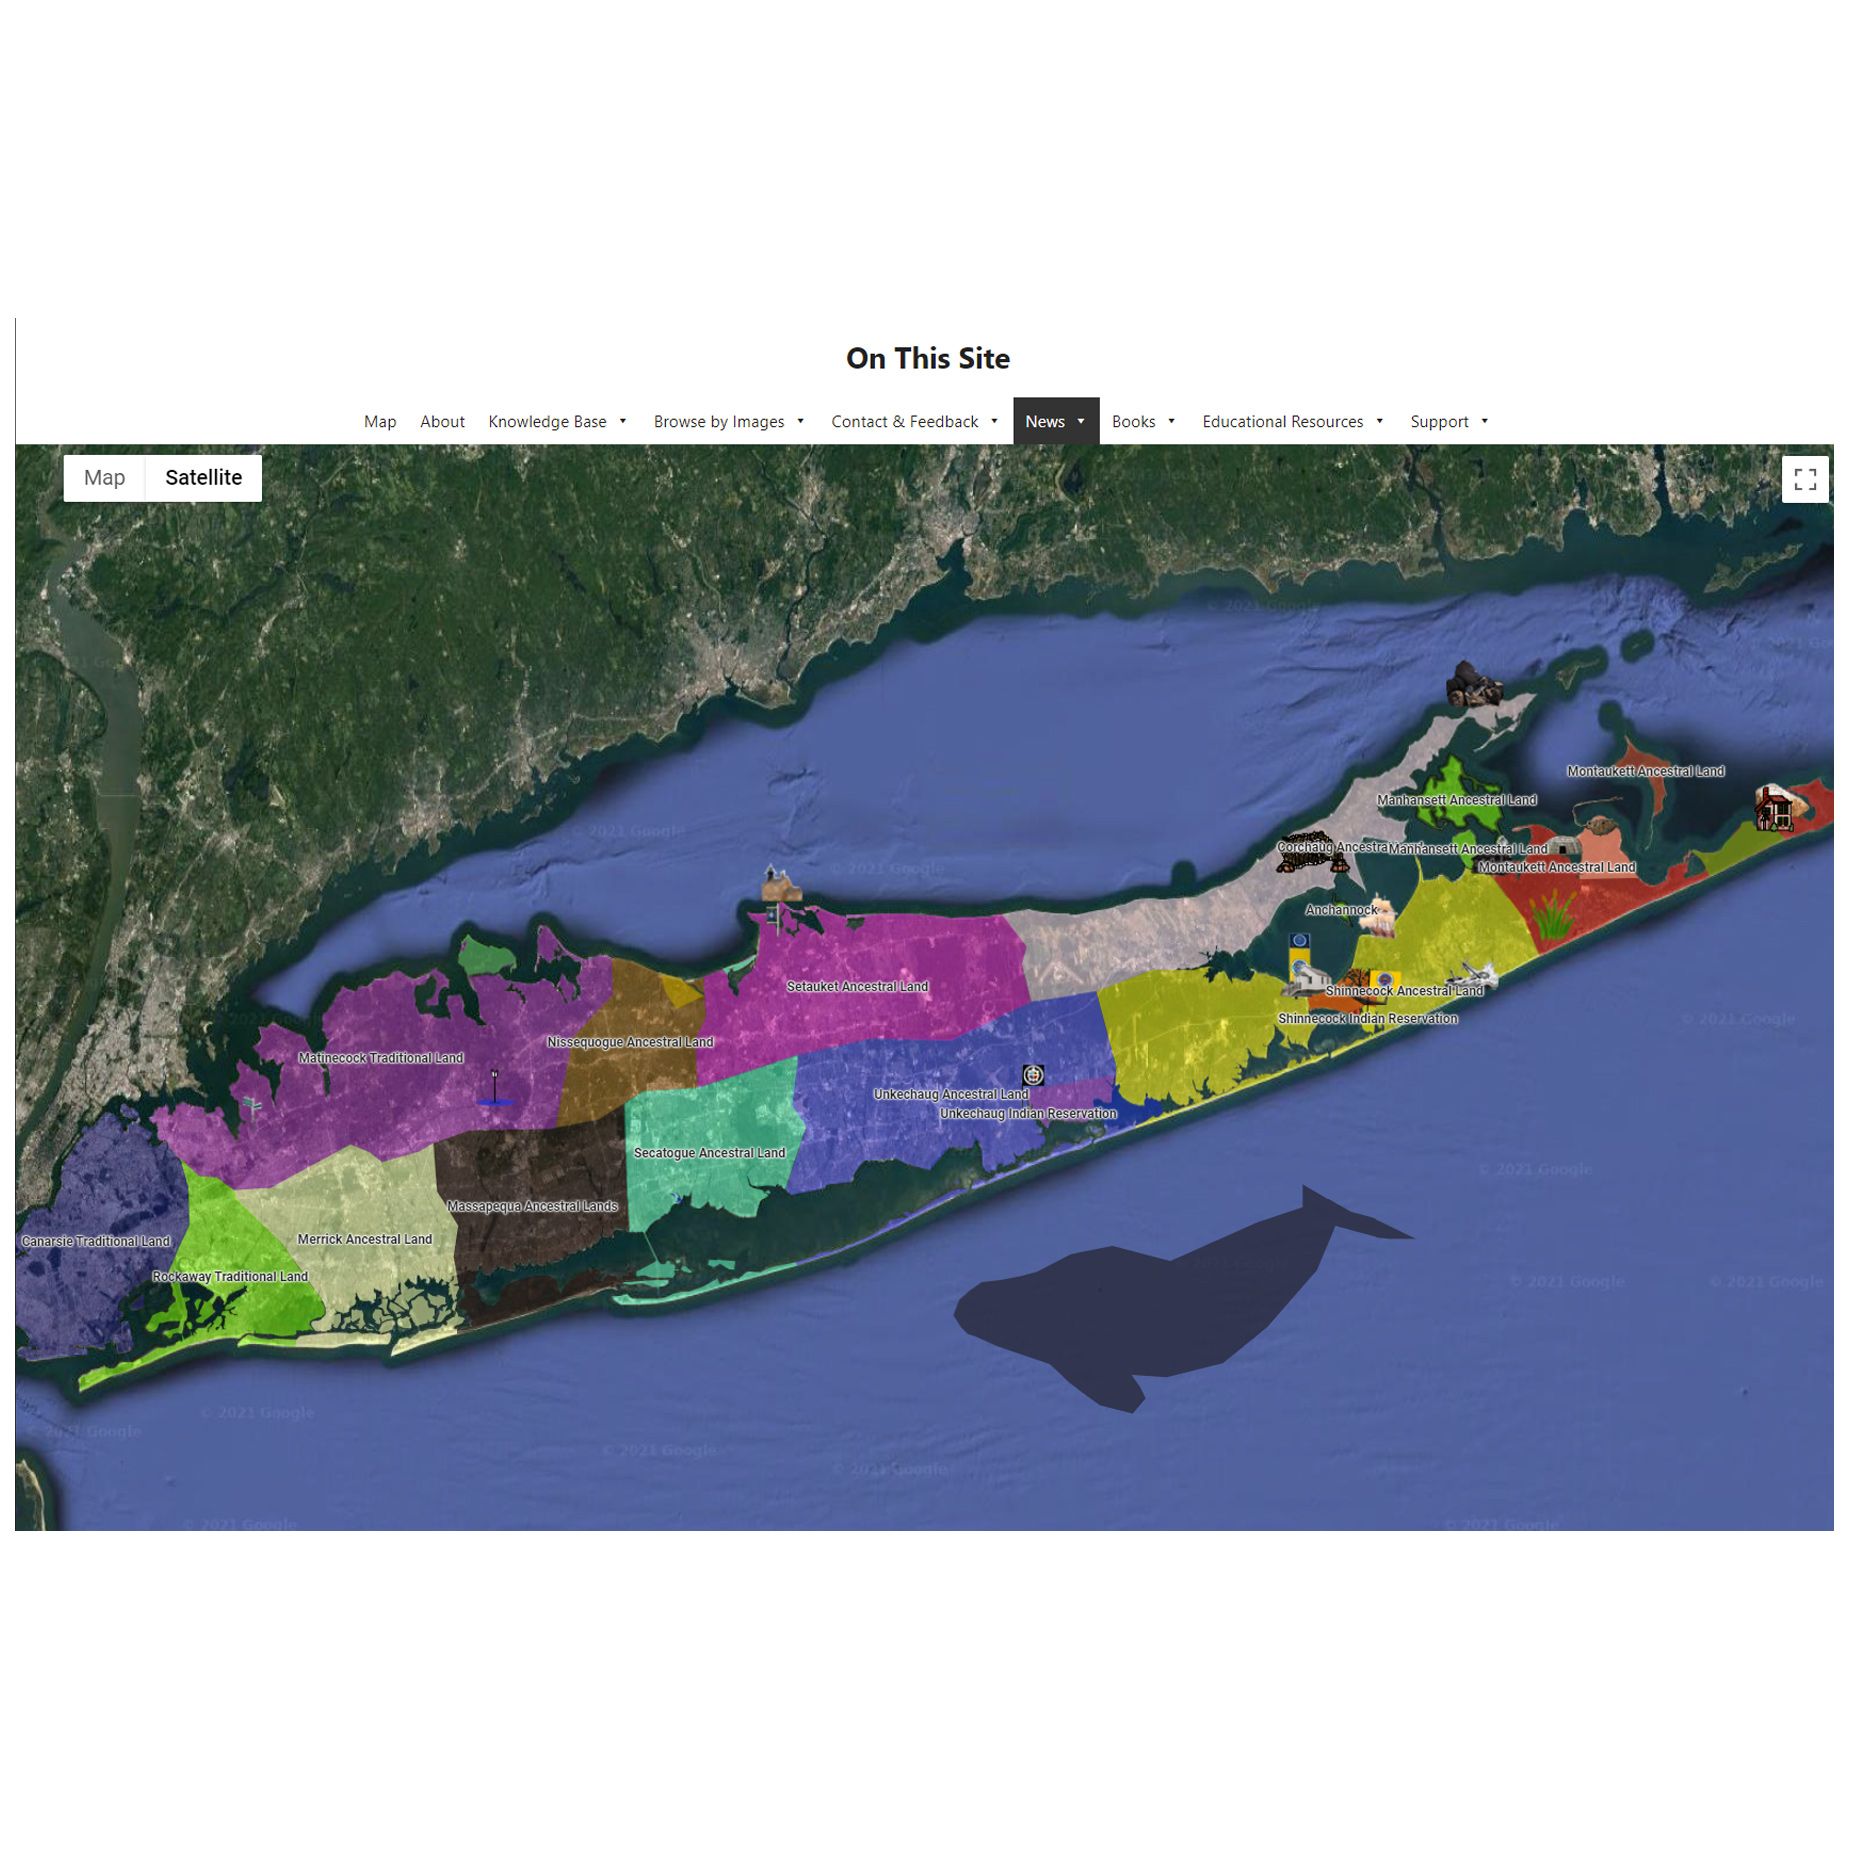 A screenshot of a website showing a map of indigenous territories on Long Island